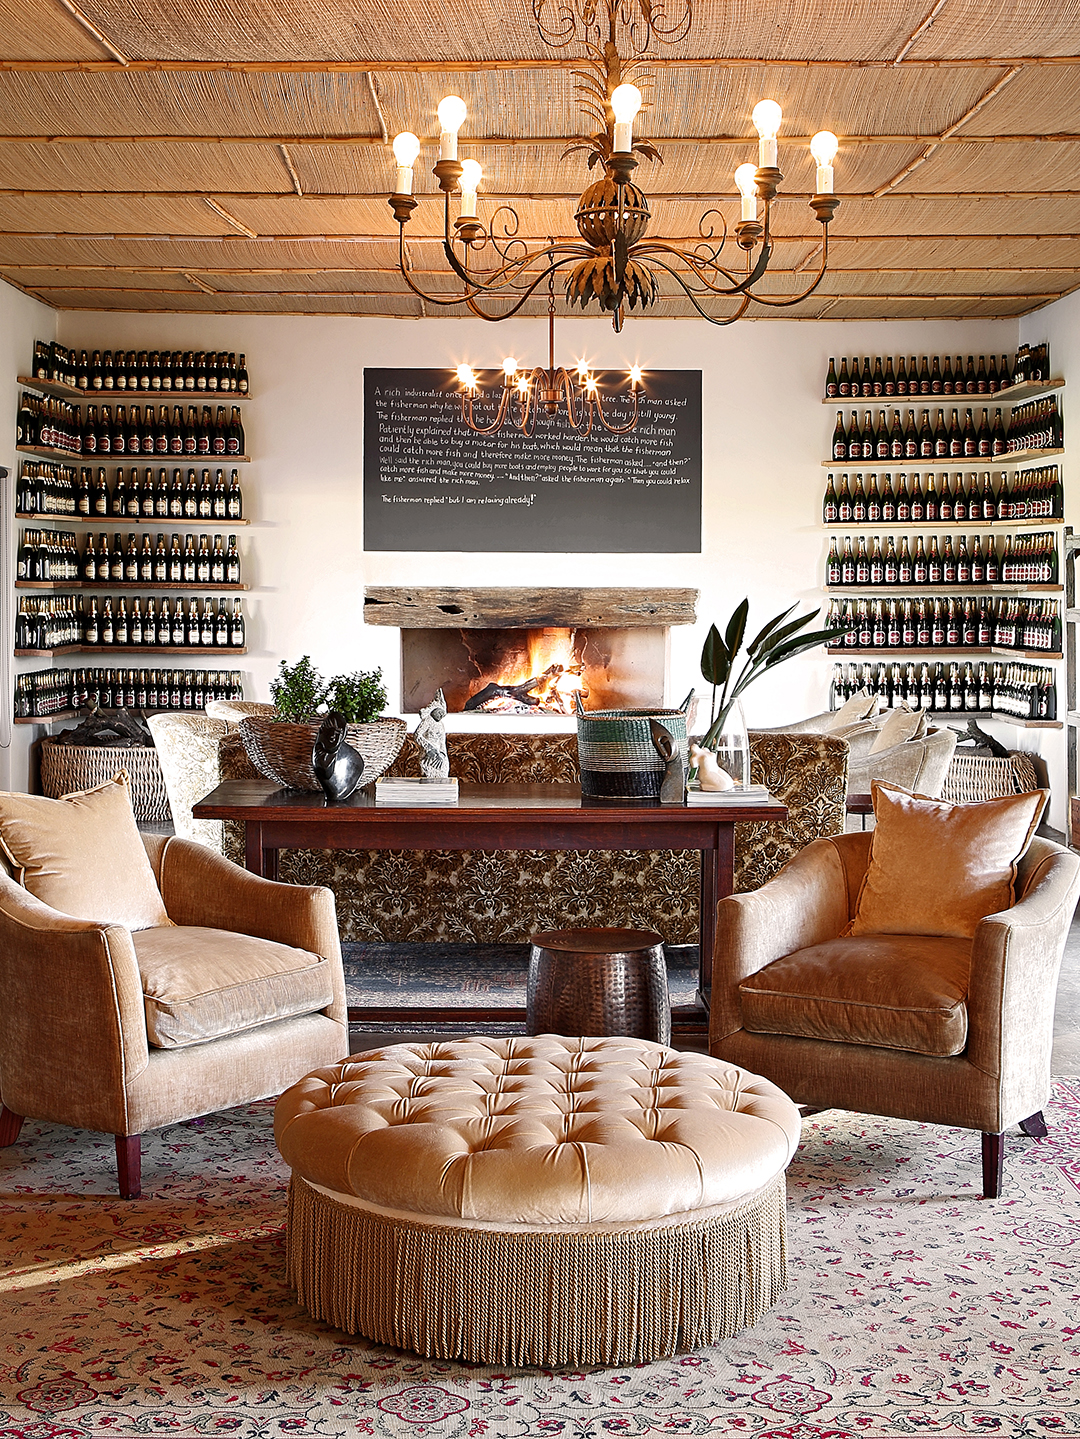 Interior of The Wine Bar with luxurious armchairs and a roaring fire.